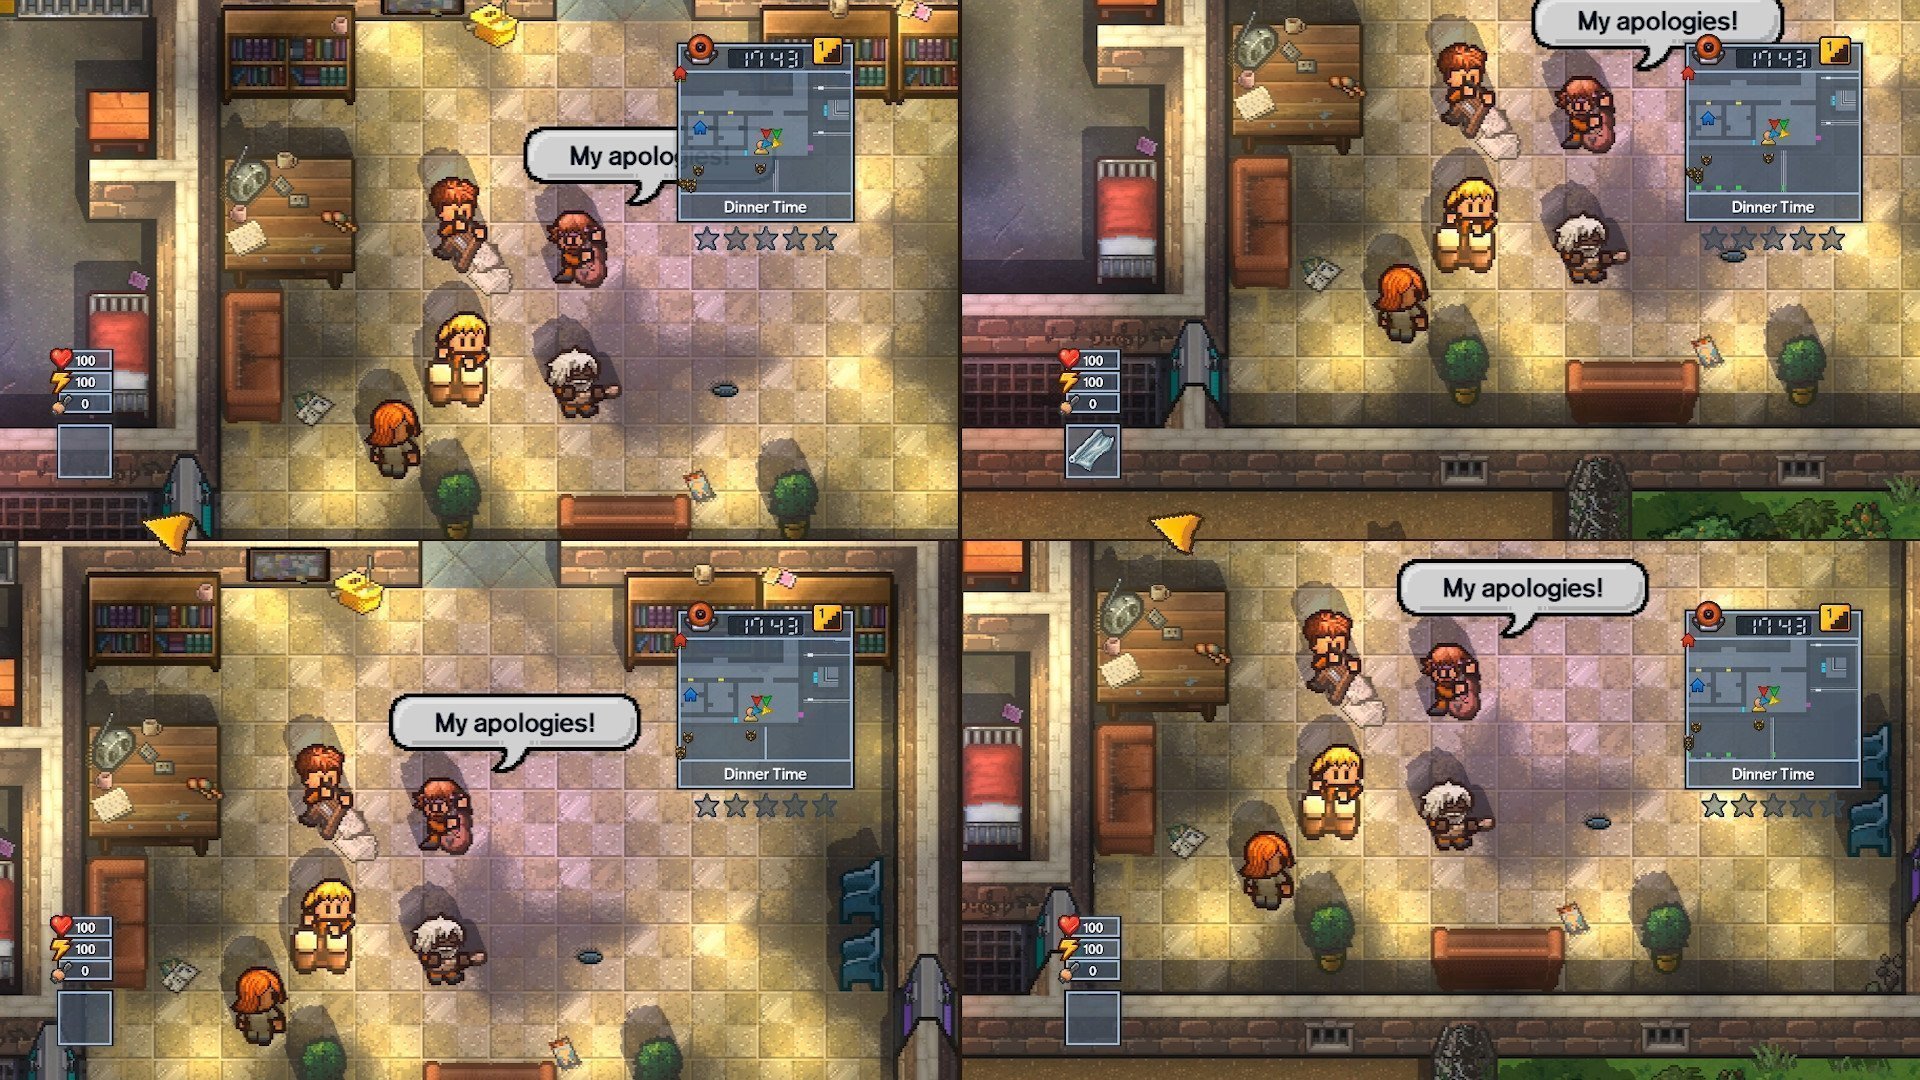 the escapists free download full version